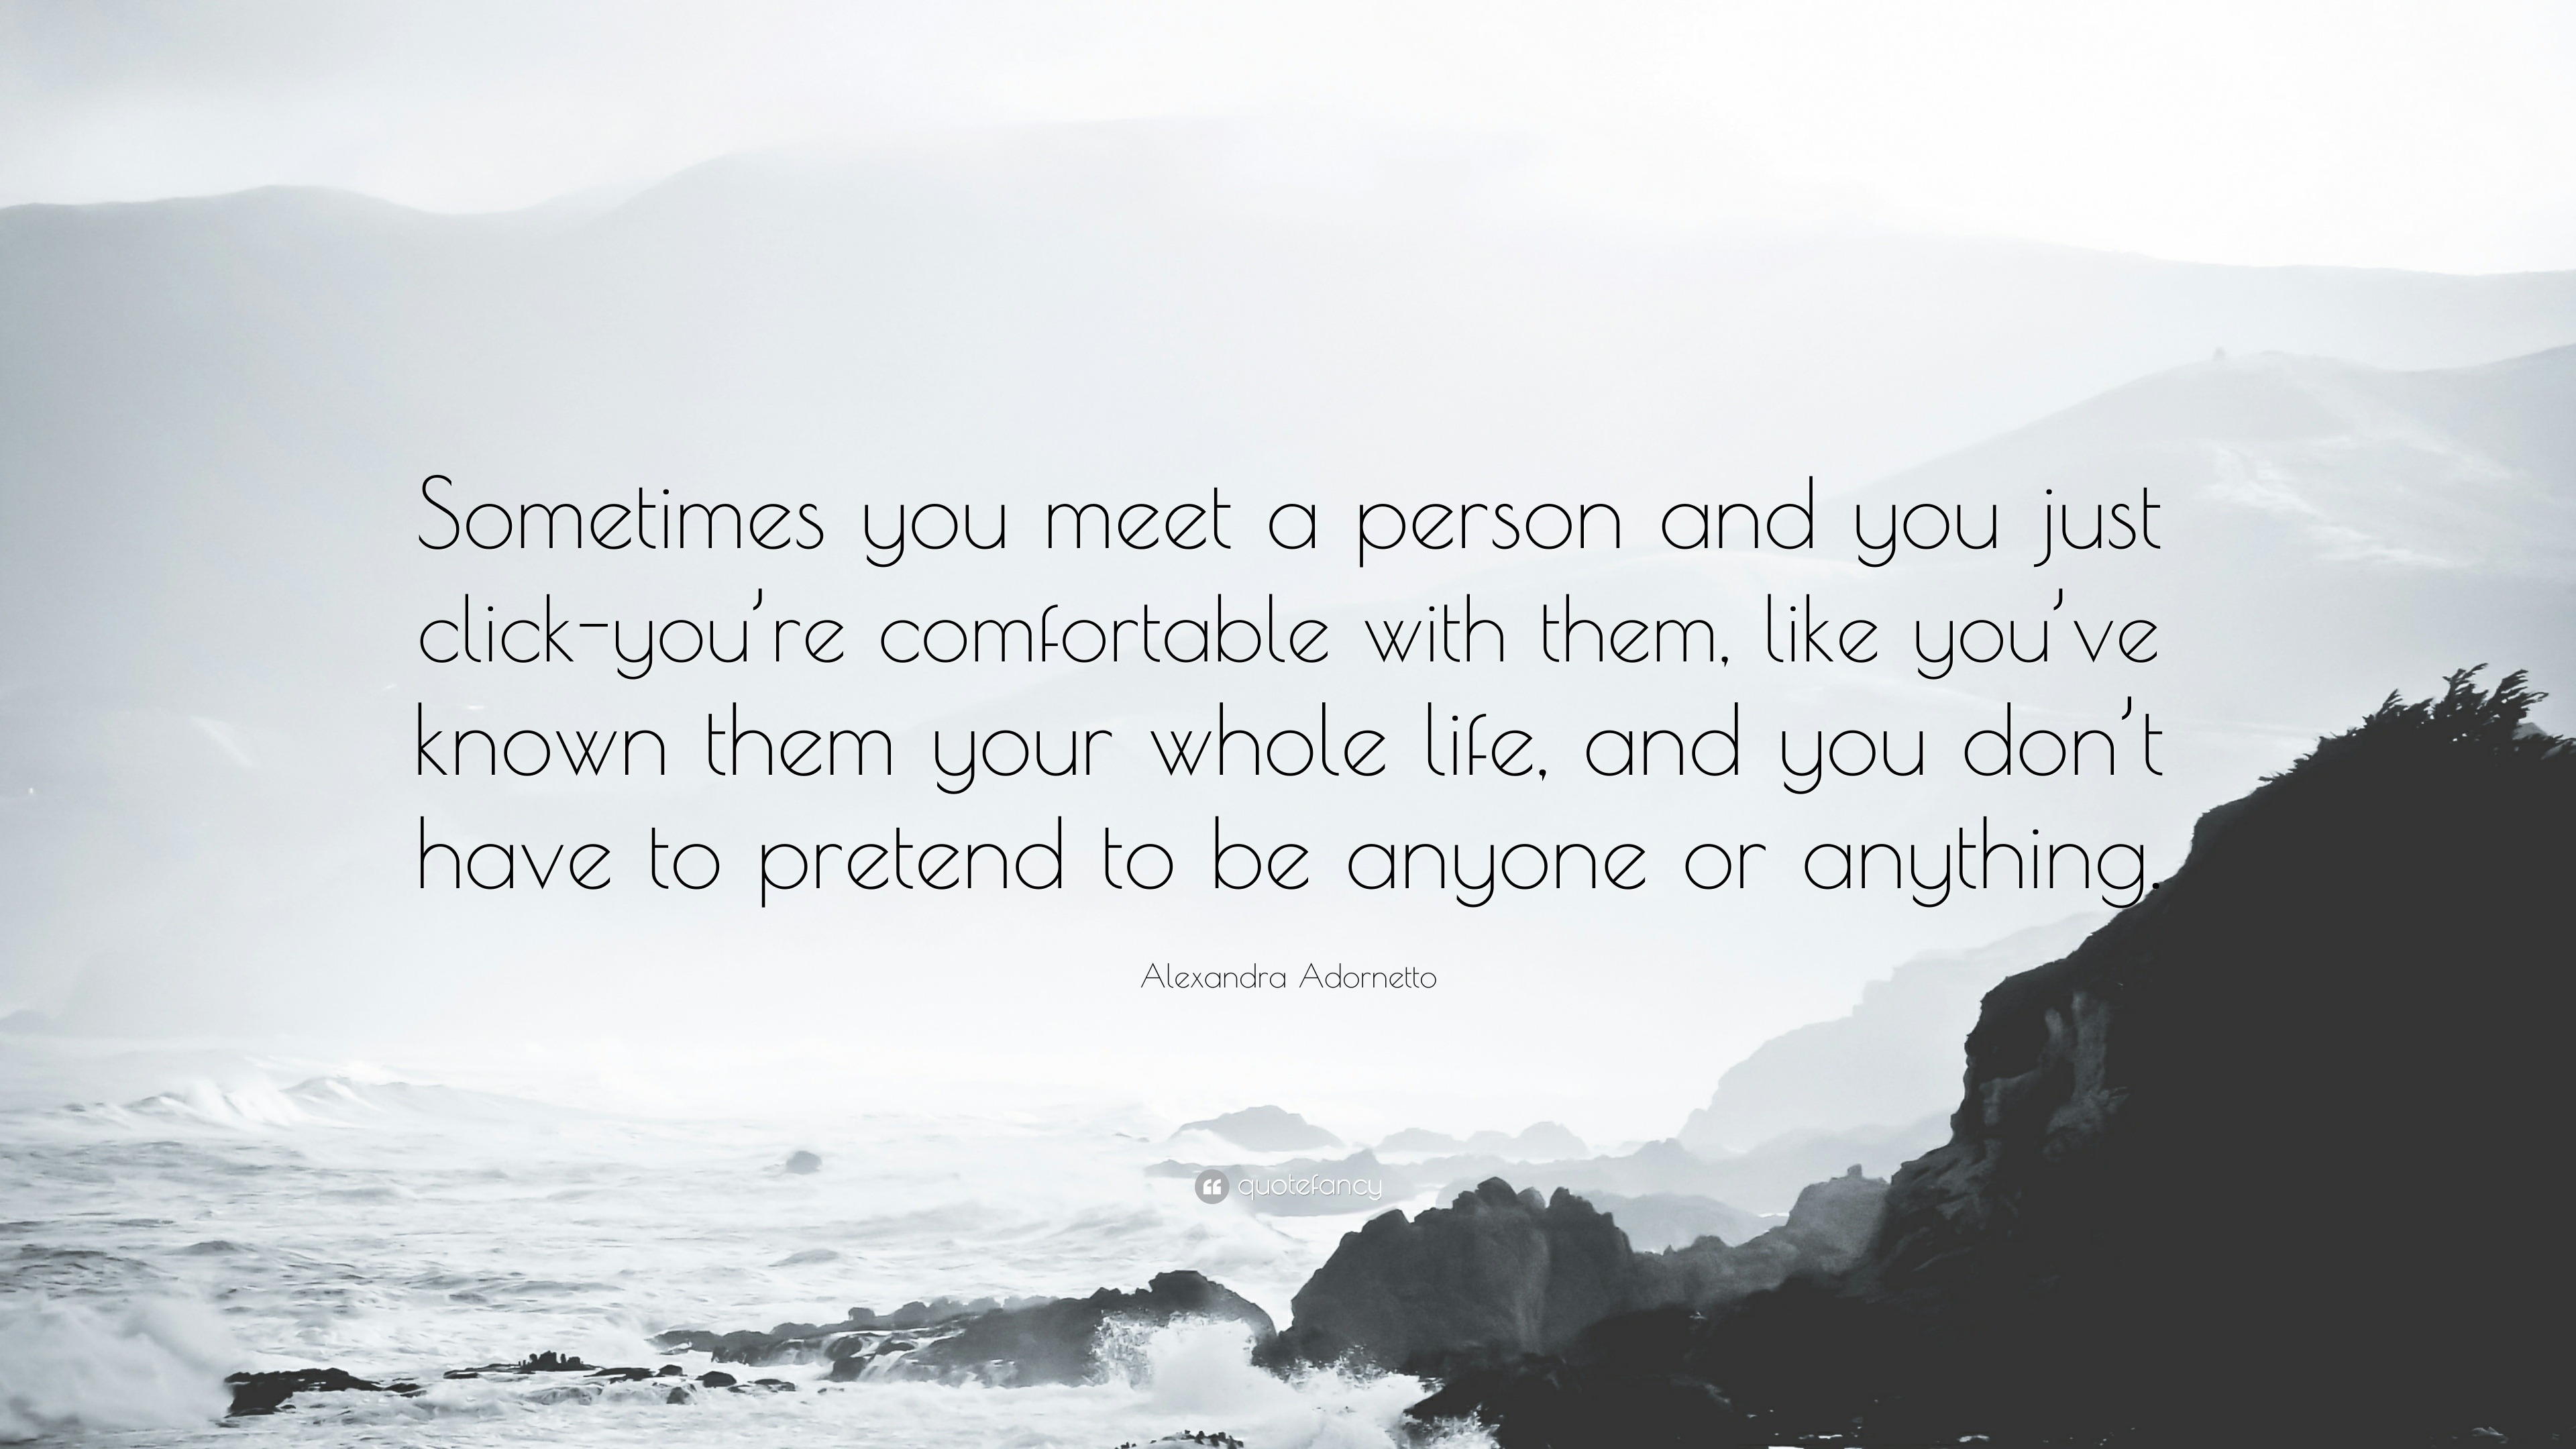 Alexandra Adornetto Quote: “Sometimes You Meet A Person And You Just Click- You're Comfortable With Them, Like You've Known Them Your Whole Life, And...”